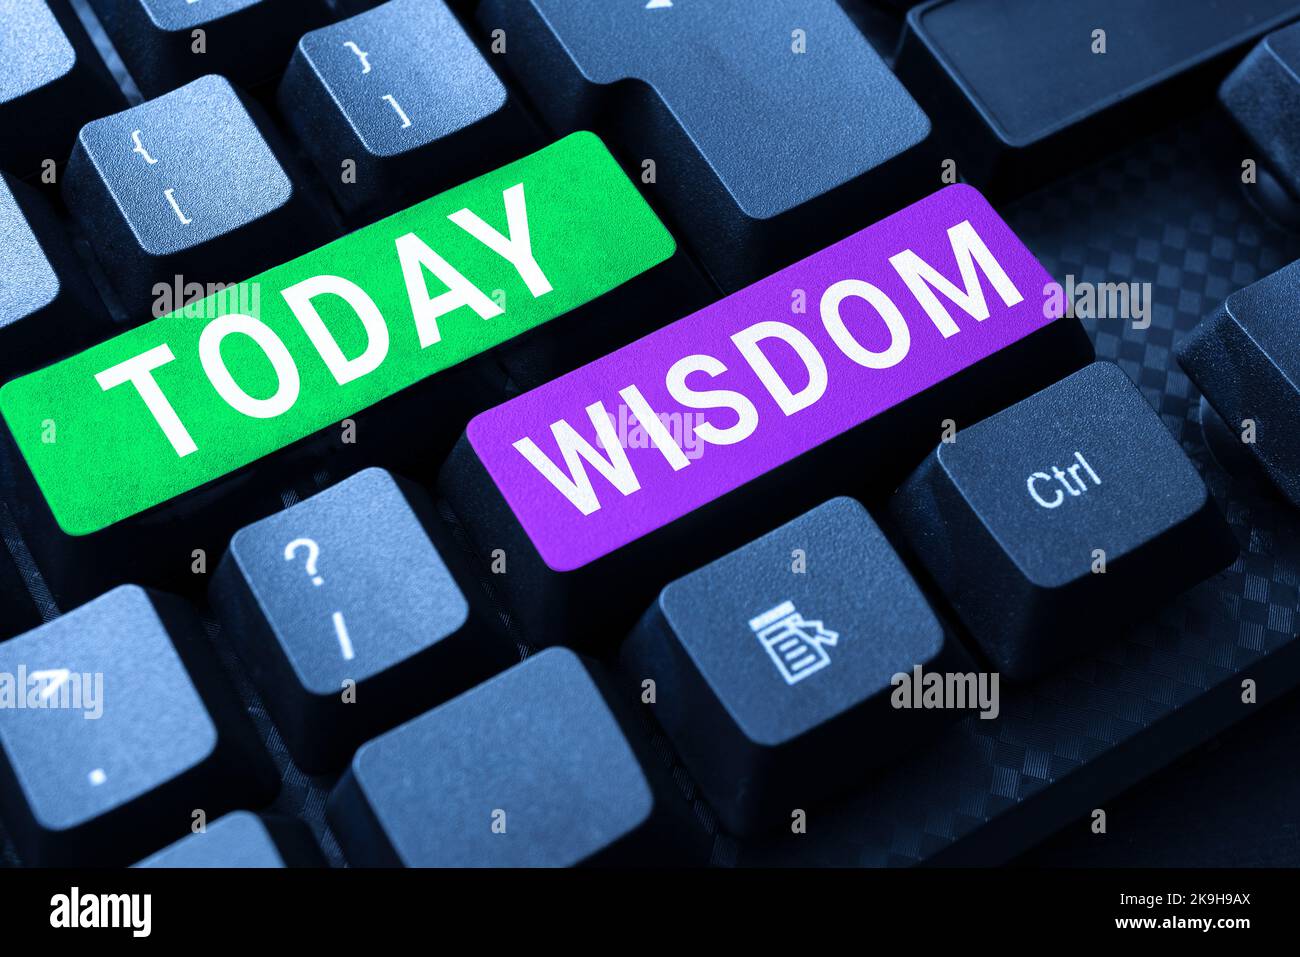 Writing displaying text Wisdom. Word for body of knowledge and principles that develops within specific period Abstract Programmer Typing Antivirus Stock Photo